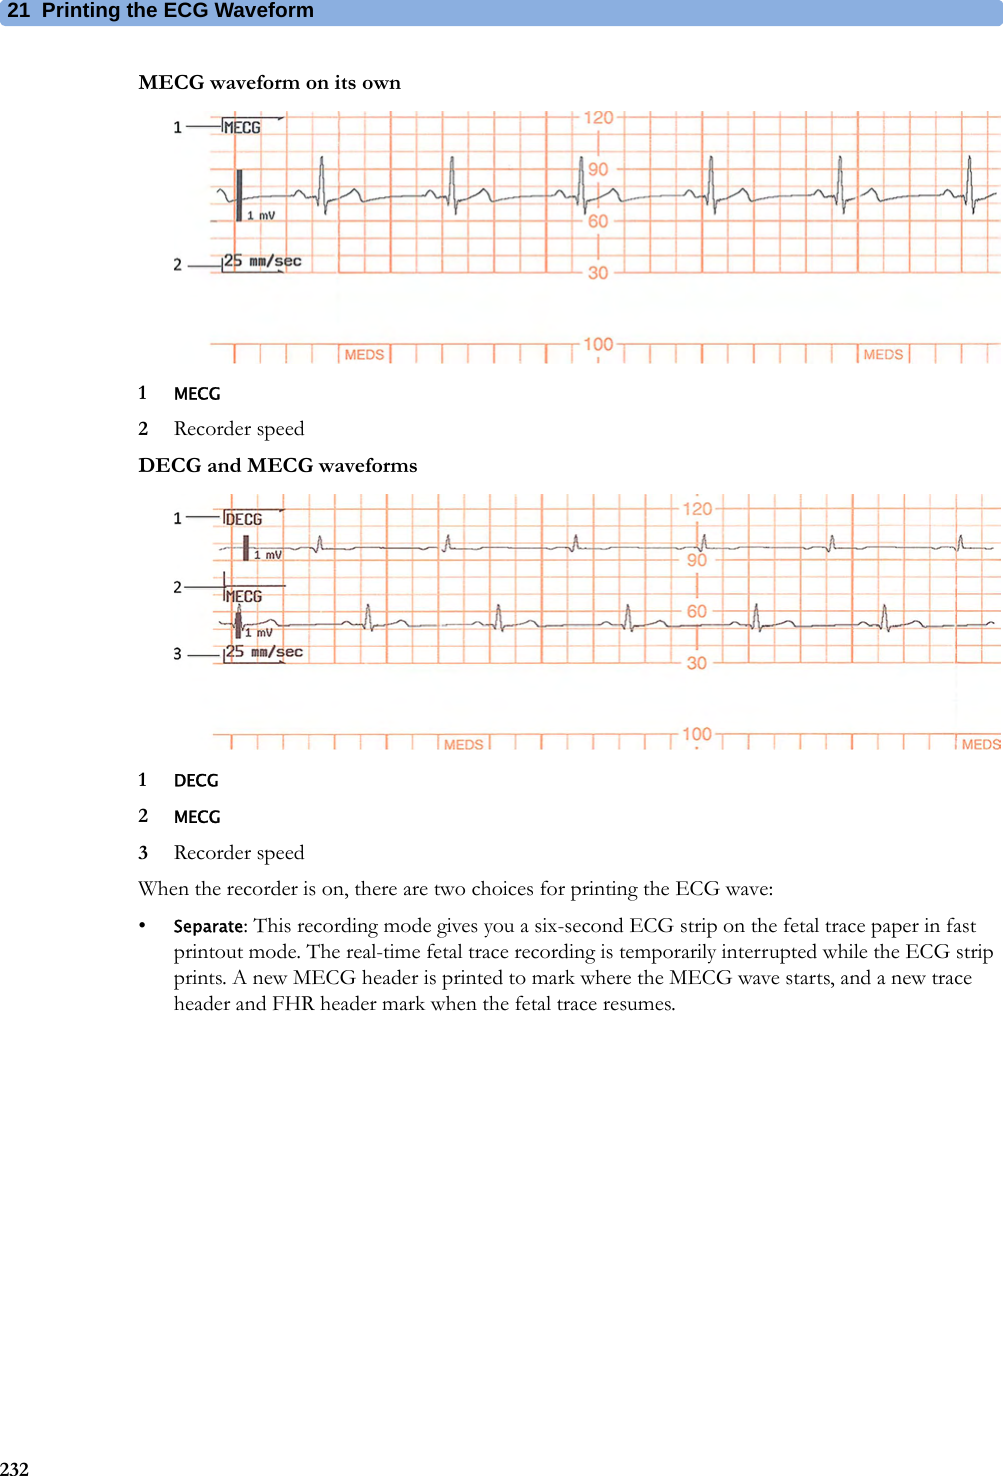 21  Printing the ECG Waveform232MECG waveform on its own1MECG2Recorder speedDECG and MECG waveforms1DECG2MECG3Recorder speedWhen the recorder is on, there are two choices for printing the ECG wave:•Separate: This recording mode gives you a six-second ECG strip on the fetal trace paper in fast printout mode. The real-time fetal trace recording is temporarily interrupted while the ECG strip prints. A new MECG header is printed to mark where the MECG wave starts, and a new trace header and FHR header mark when the fetal trace resumes.